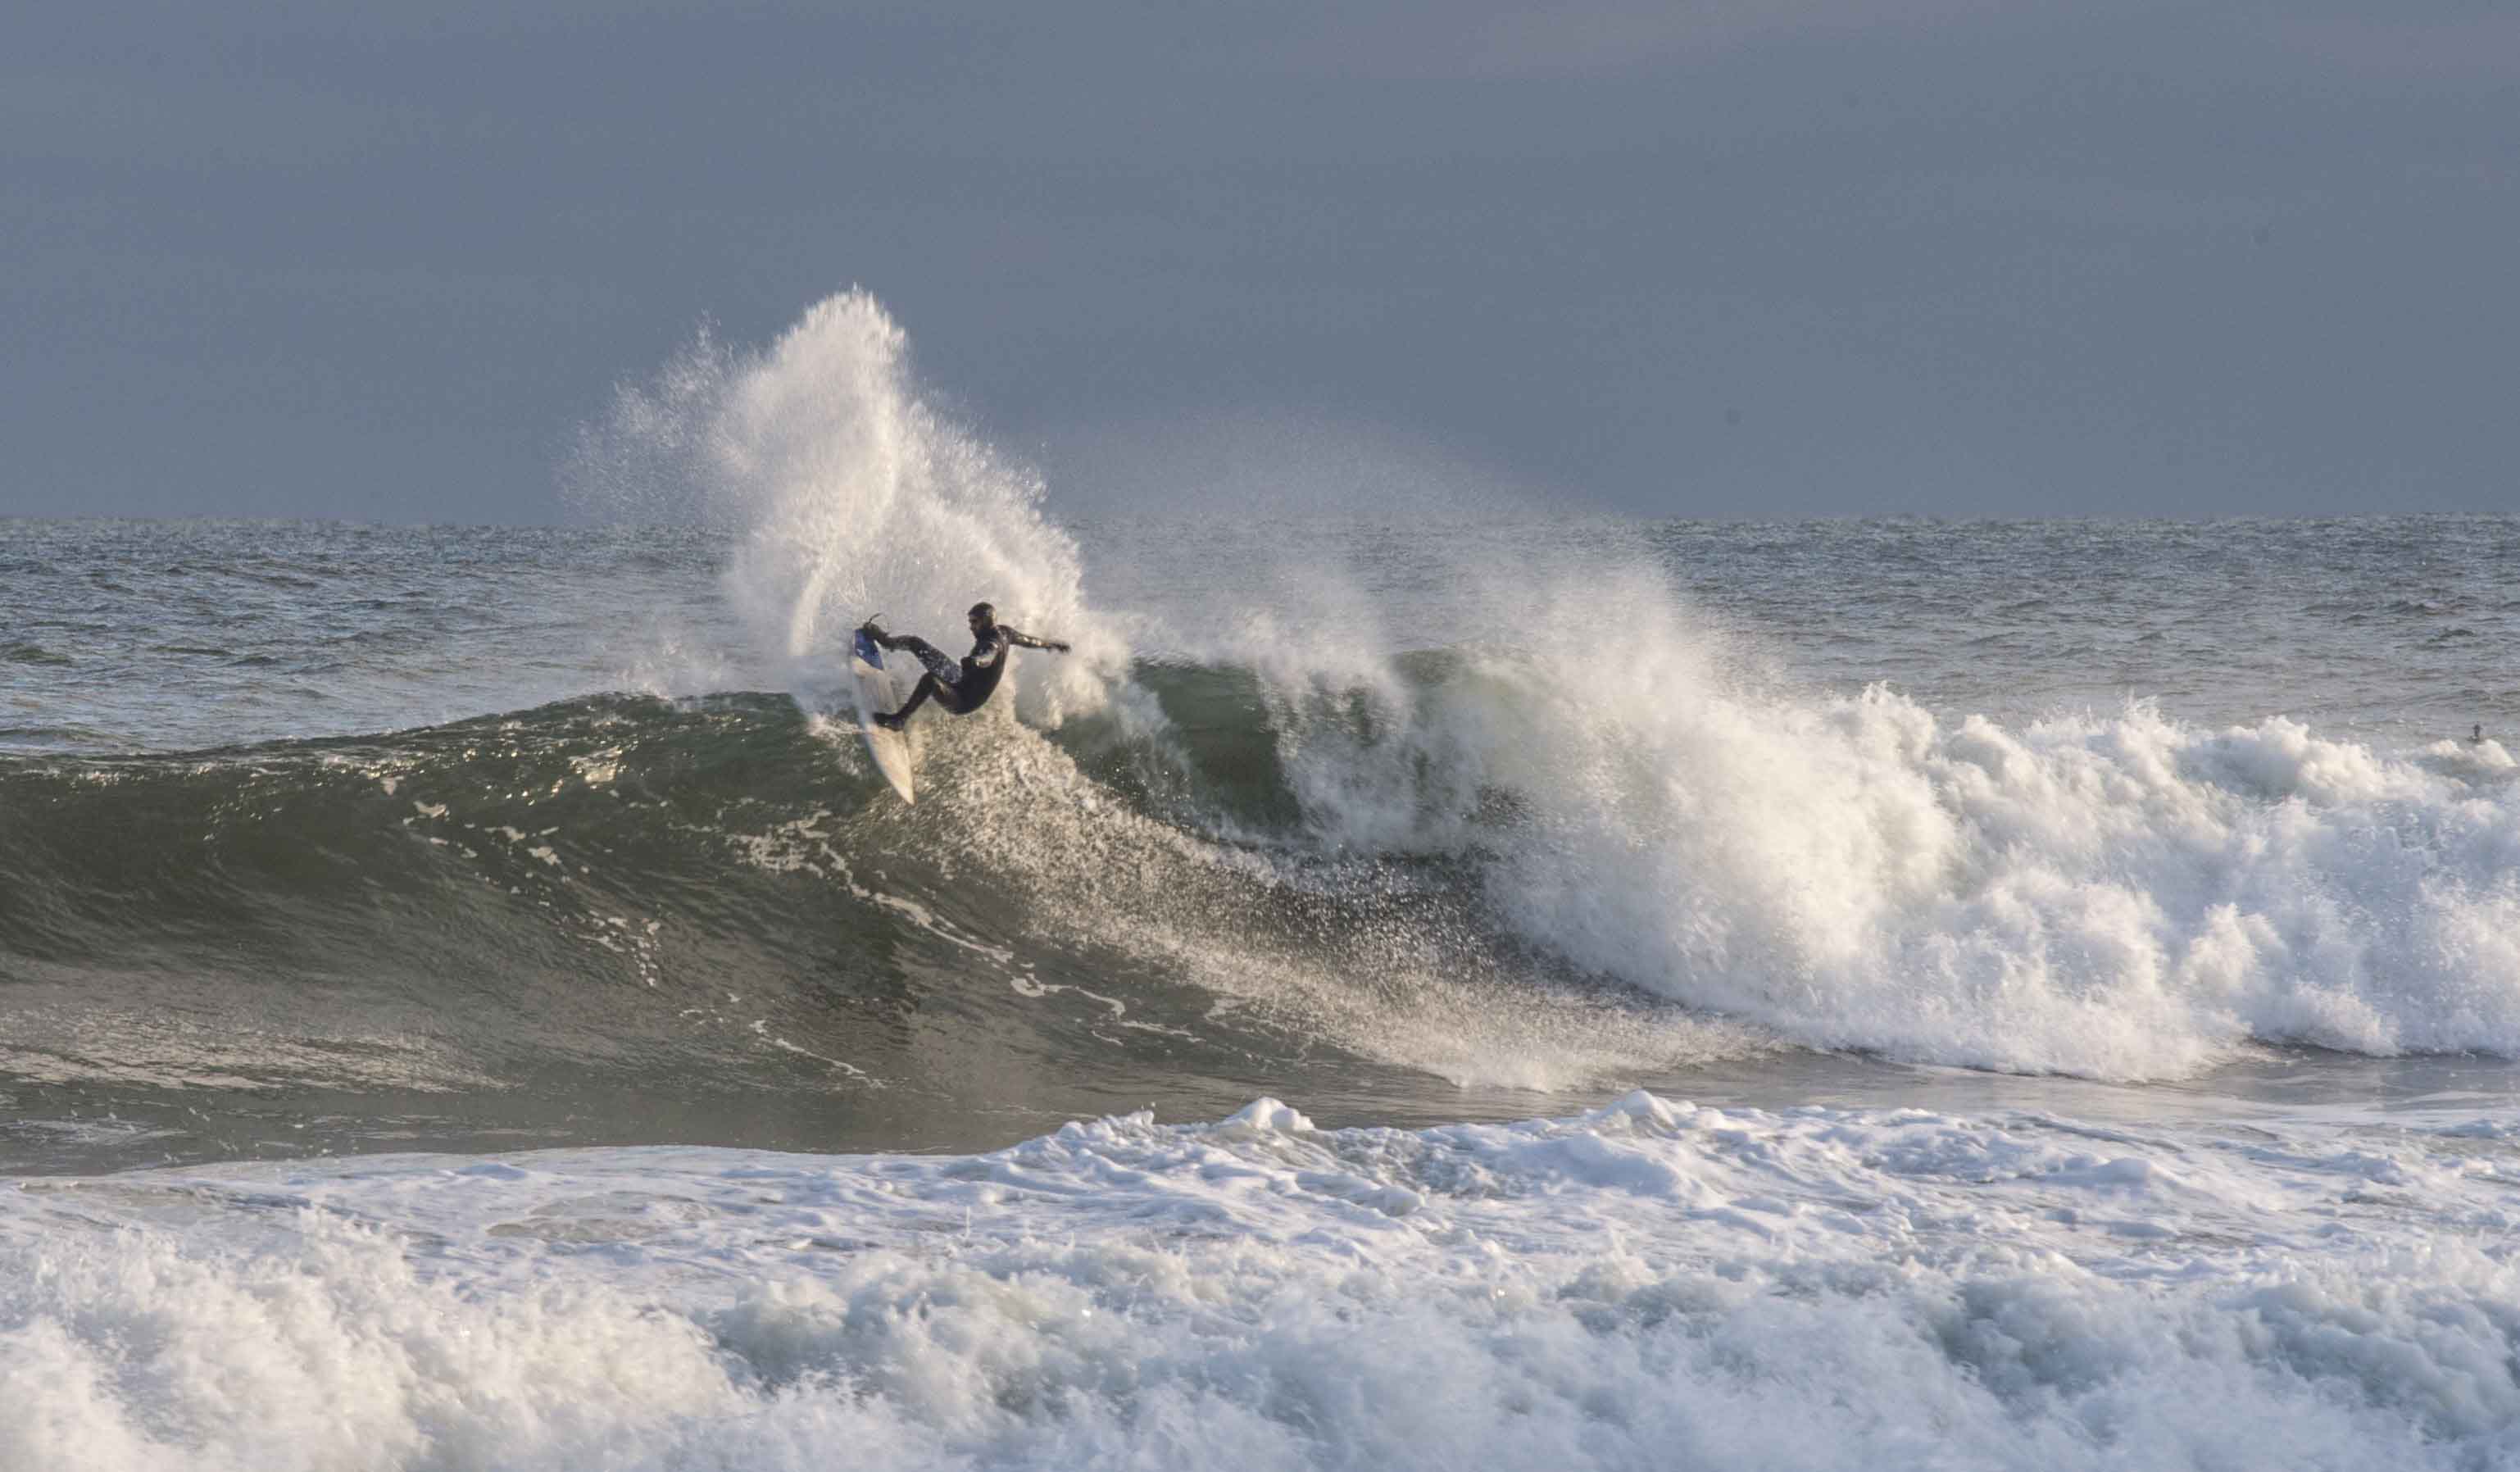 Best Turn: Mike Poli. Between taking some crazy trips to much warmer locales in search of waves, Mike has been throwing some crazy hacks down at home this winter.